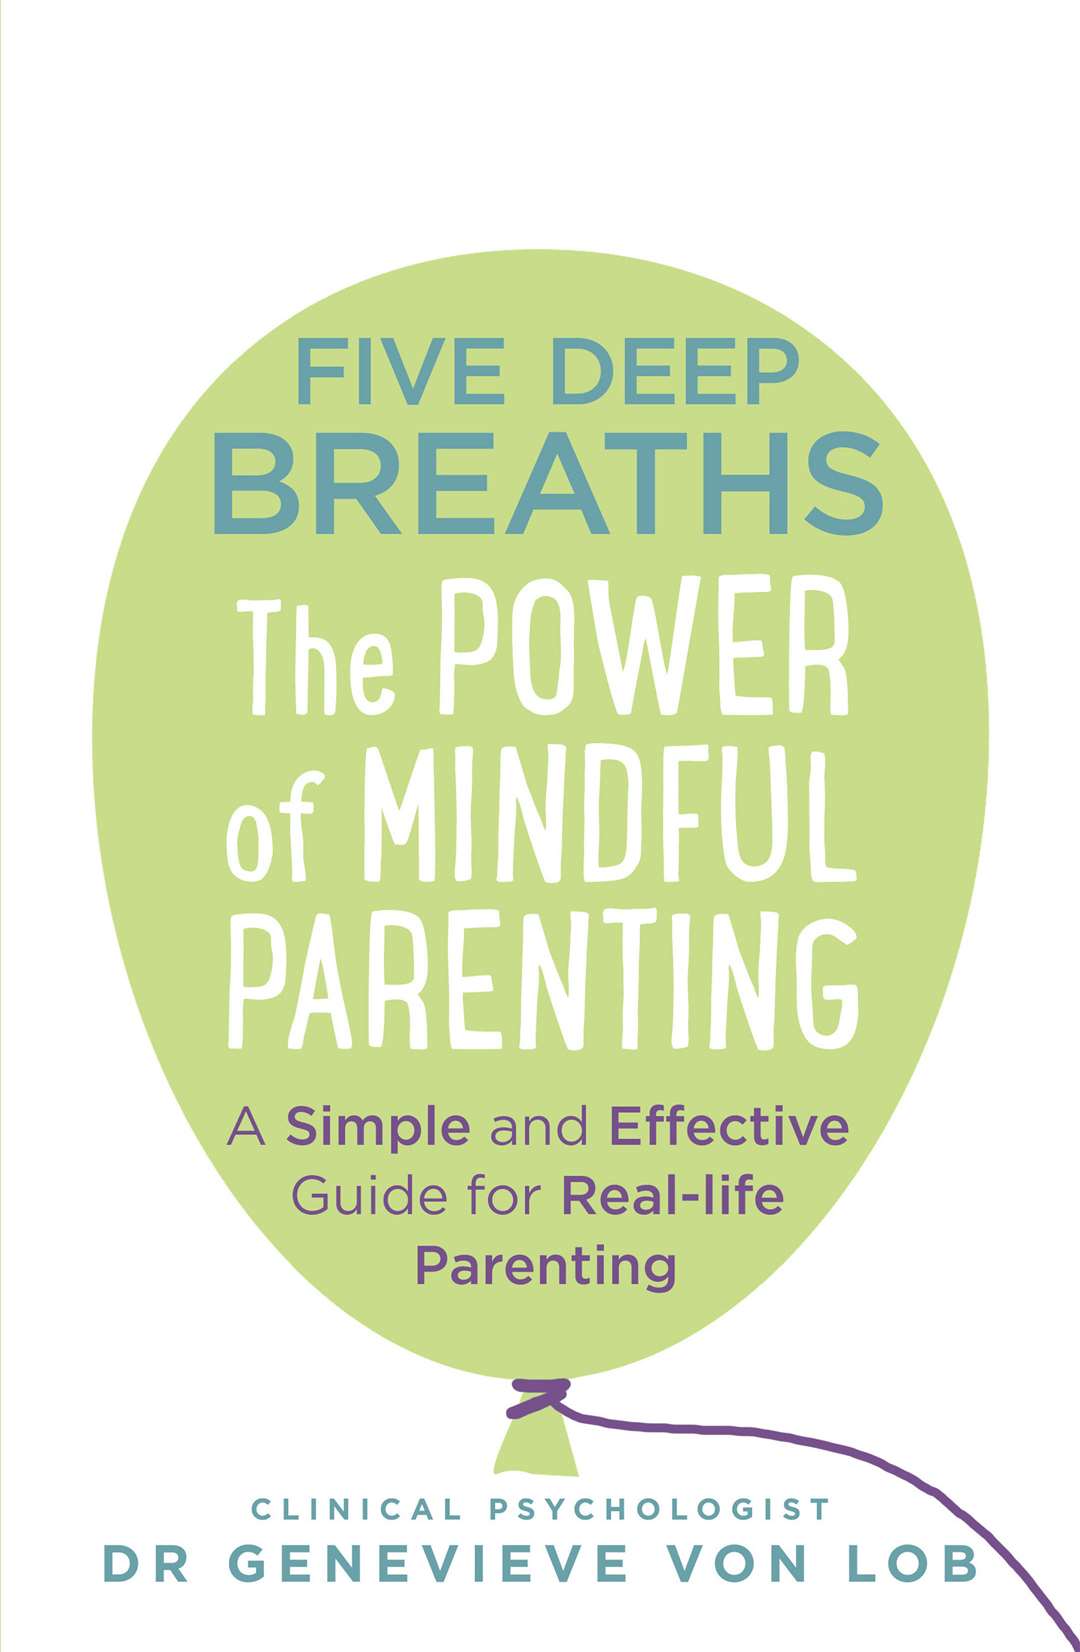 The Power Of Mindful Parenting is published by Bantam Press, £14.99